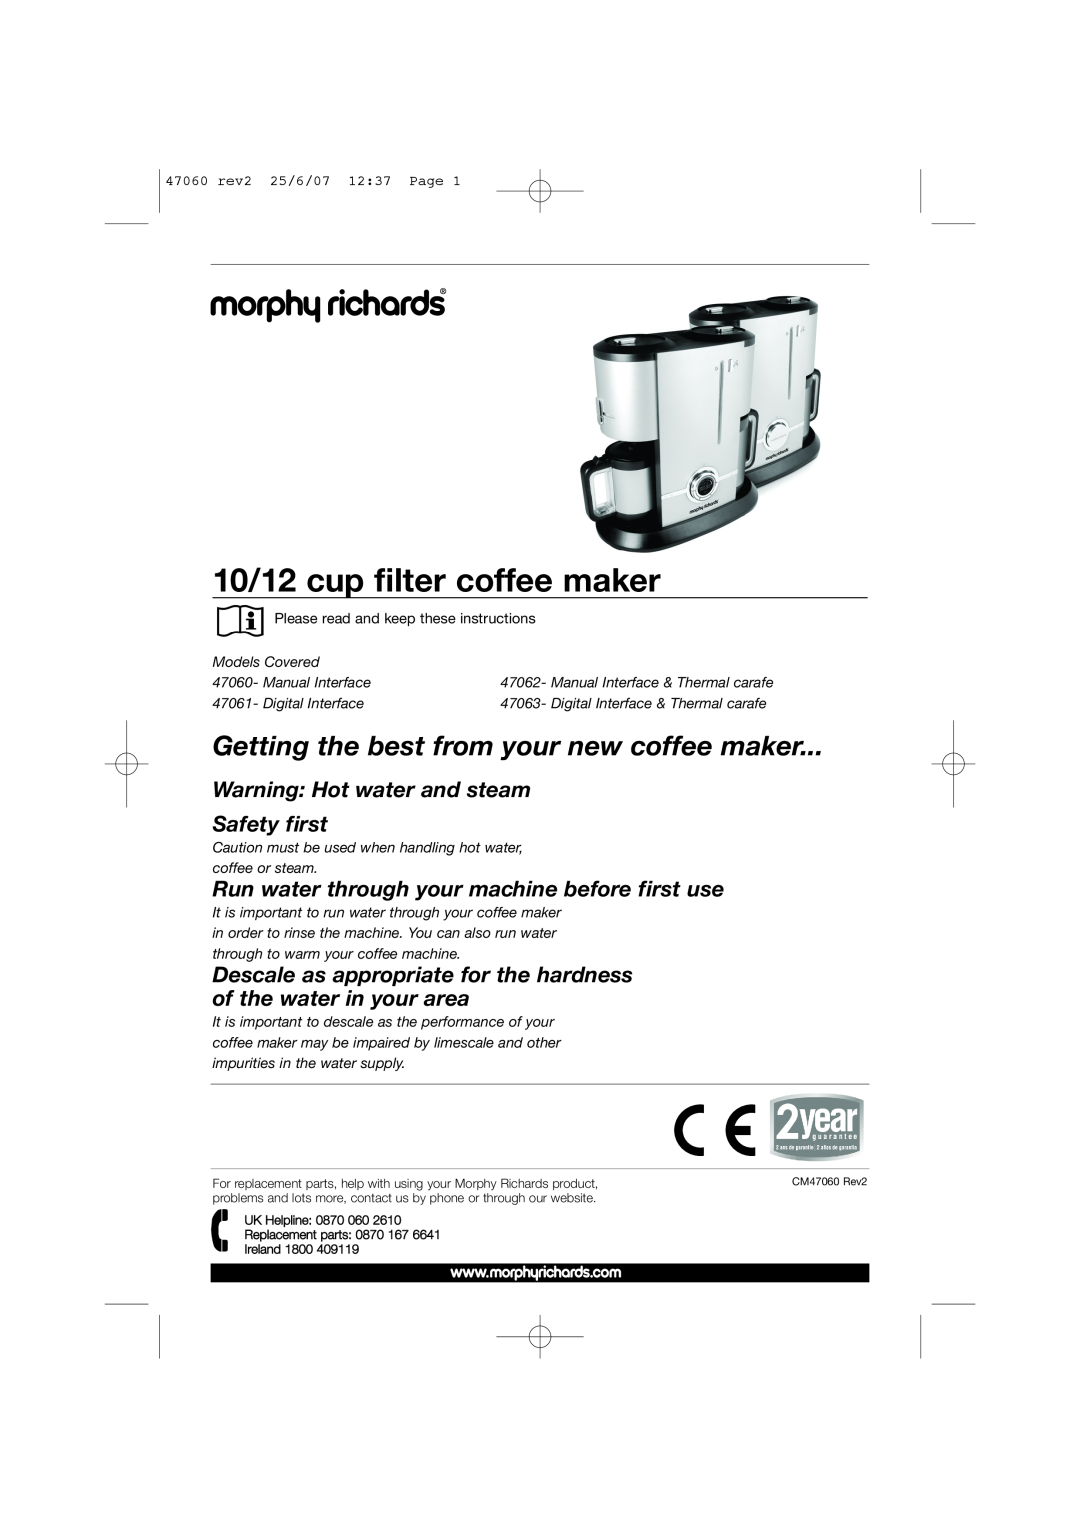 Morphy Richards 47062, 47060, 47063, 47061 manual 10/12 cup filter coffee maker, Getting the best from your new coffee maker 